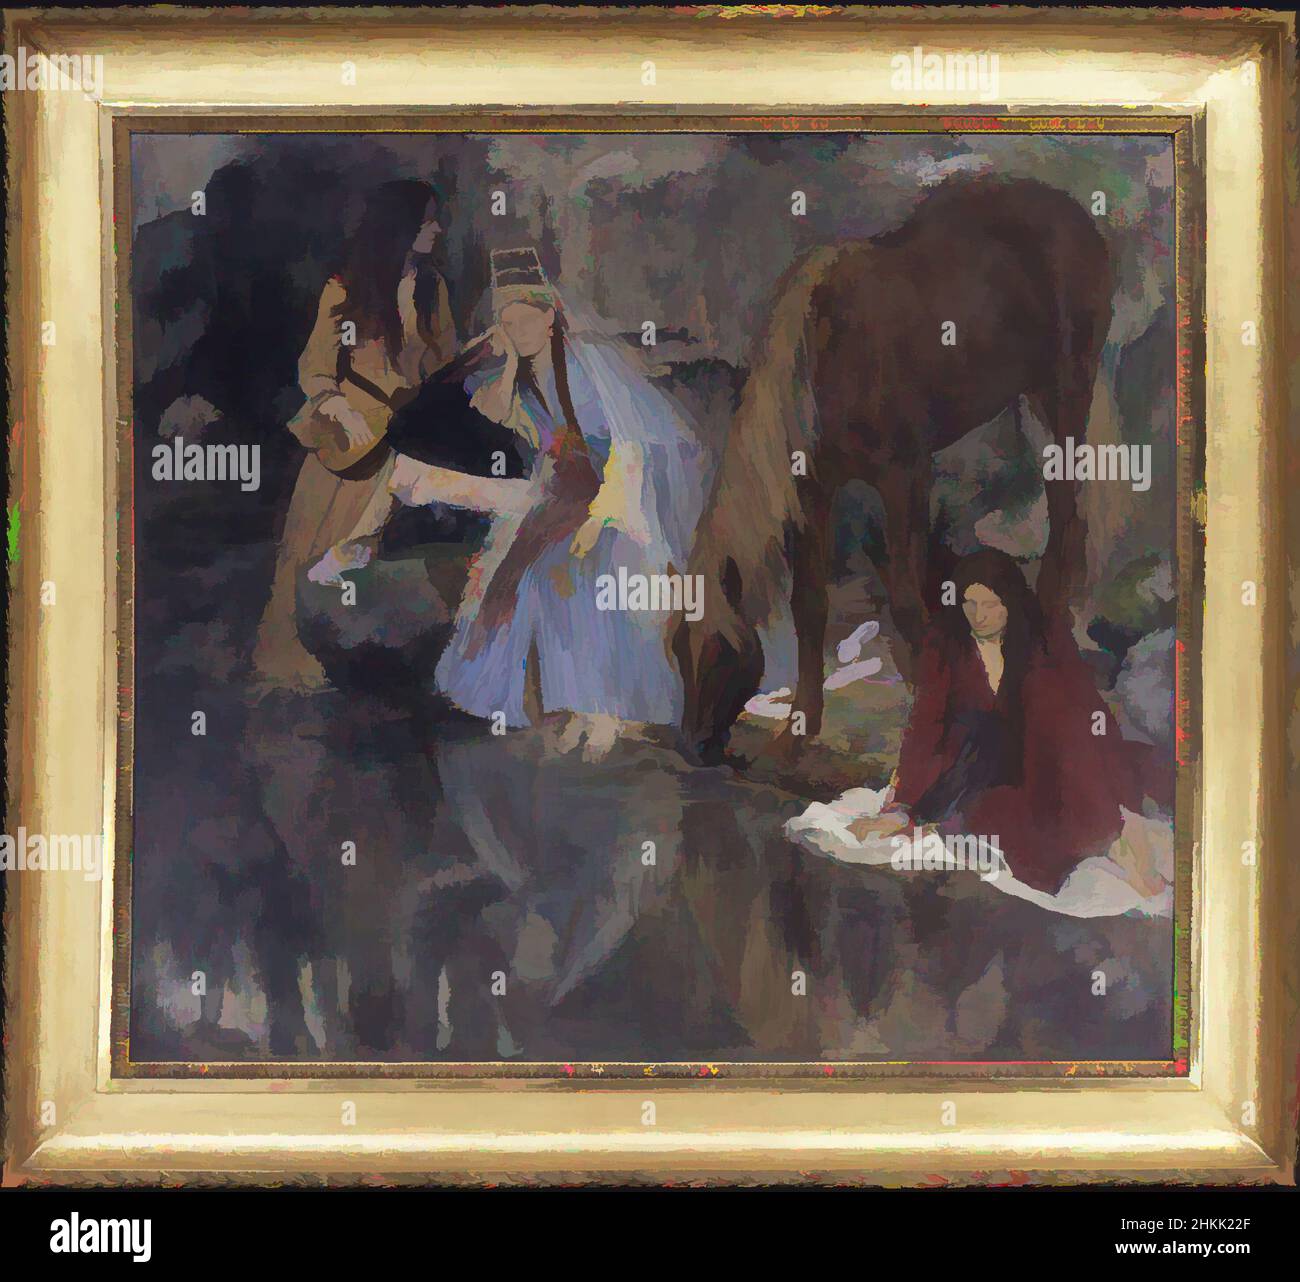 Art inspired by Portrait of Mlle Fiocre in the Ballet 'La Source', Portrait de Mlle...E[ugénie] F[iocre]: à propos du ballet 'La Source', Edgar Degas, French, 1834-1917, Oil on canvas, France, ca. 1867-1868, 51 1/2 x 57 1/8 in., 166 lb., 130.8 x 145.1 cm, 75.3kg, 19th Century, ballerina, Classic works modernized by Artotop with a splash of modernity. Shapes, color and value, eye-catching visual impact on art. Emotions through freedom of artworks in a contemporary way. A timeless message pursuing a wildly creative new direction. Artists turning to the digital medium and creating the Artotop NFT Stock Photo